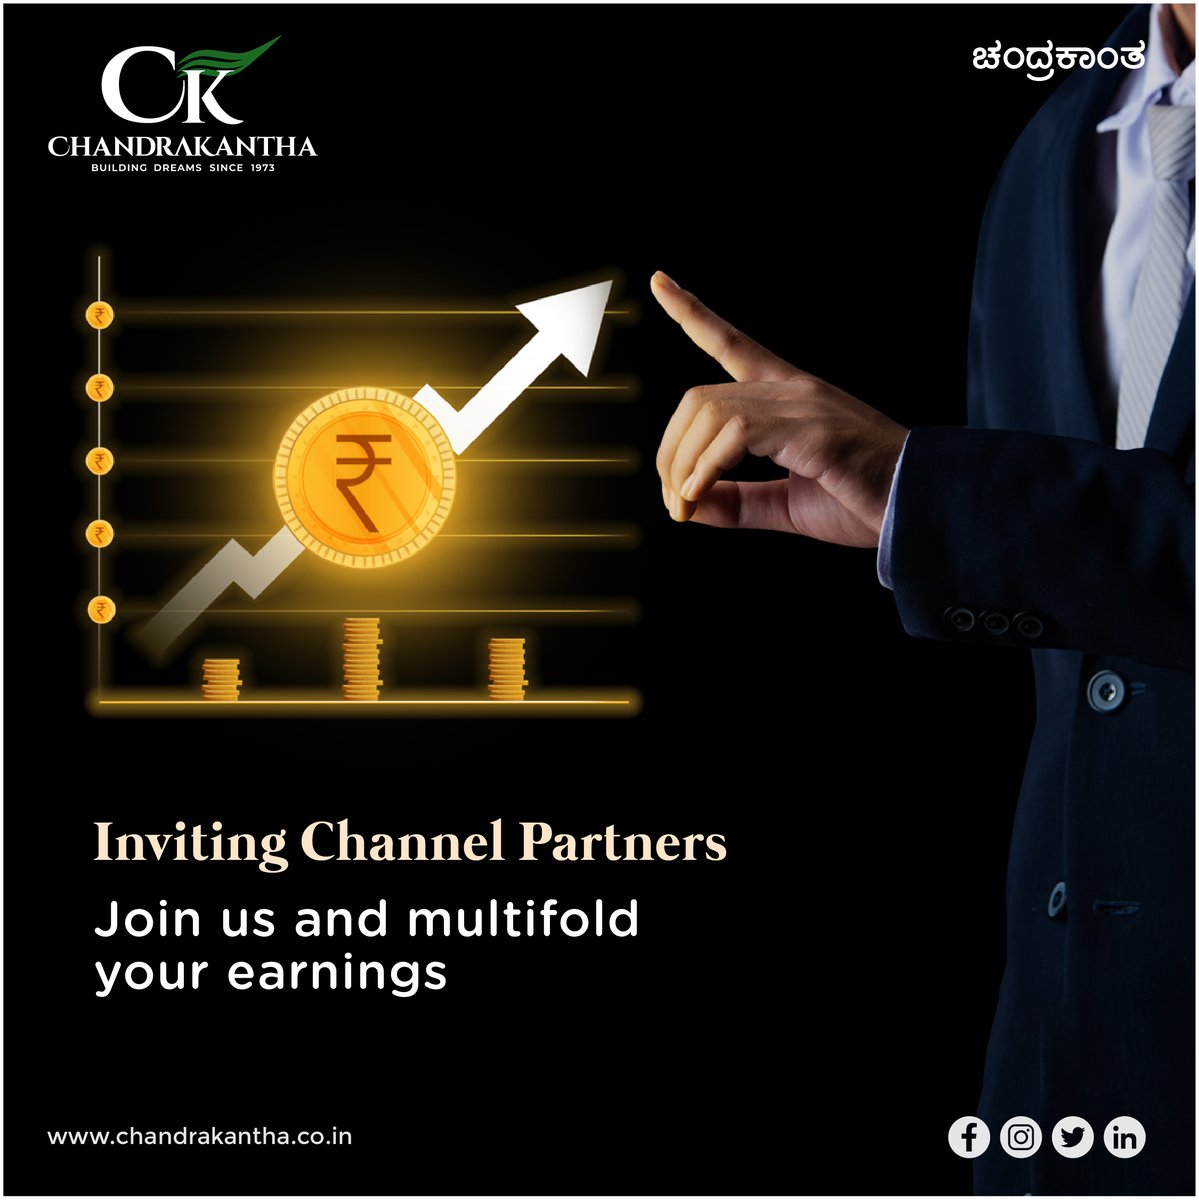 Calling all Channel Partners! Join us at By The Beautiful Lake and multiply your earnings. Be a part of our journey as we redefine living spaces. #ChannelPartners #ByTheBeautifulLake #chandrakanthadevelopers #2bhkvillas #3bhkvillas #lakefrontvillas #lakeview #lakefronthouse